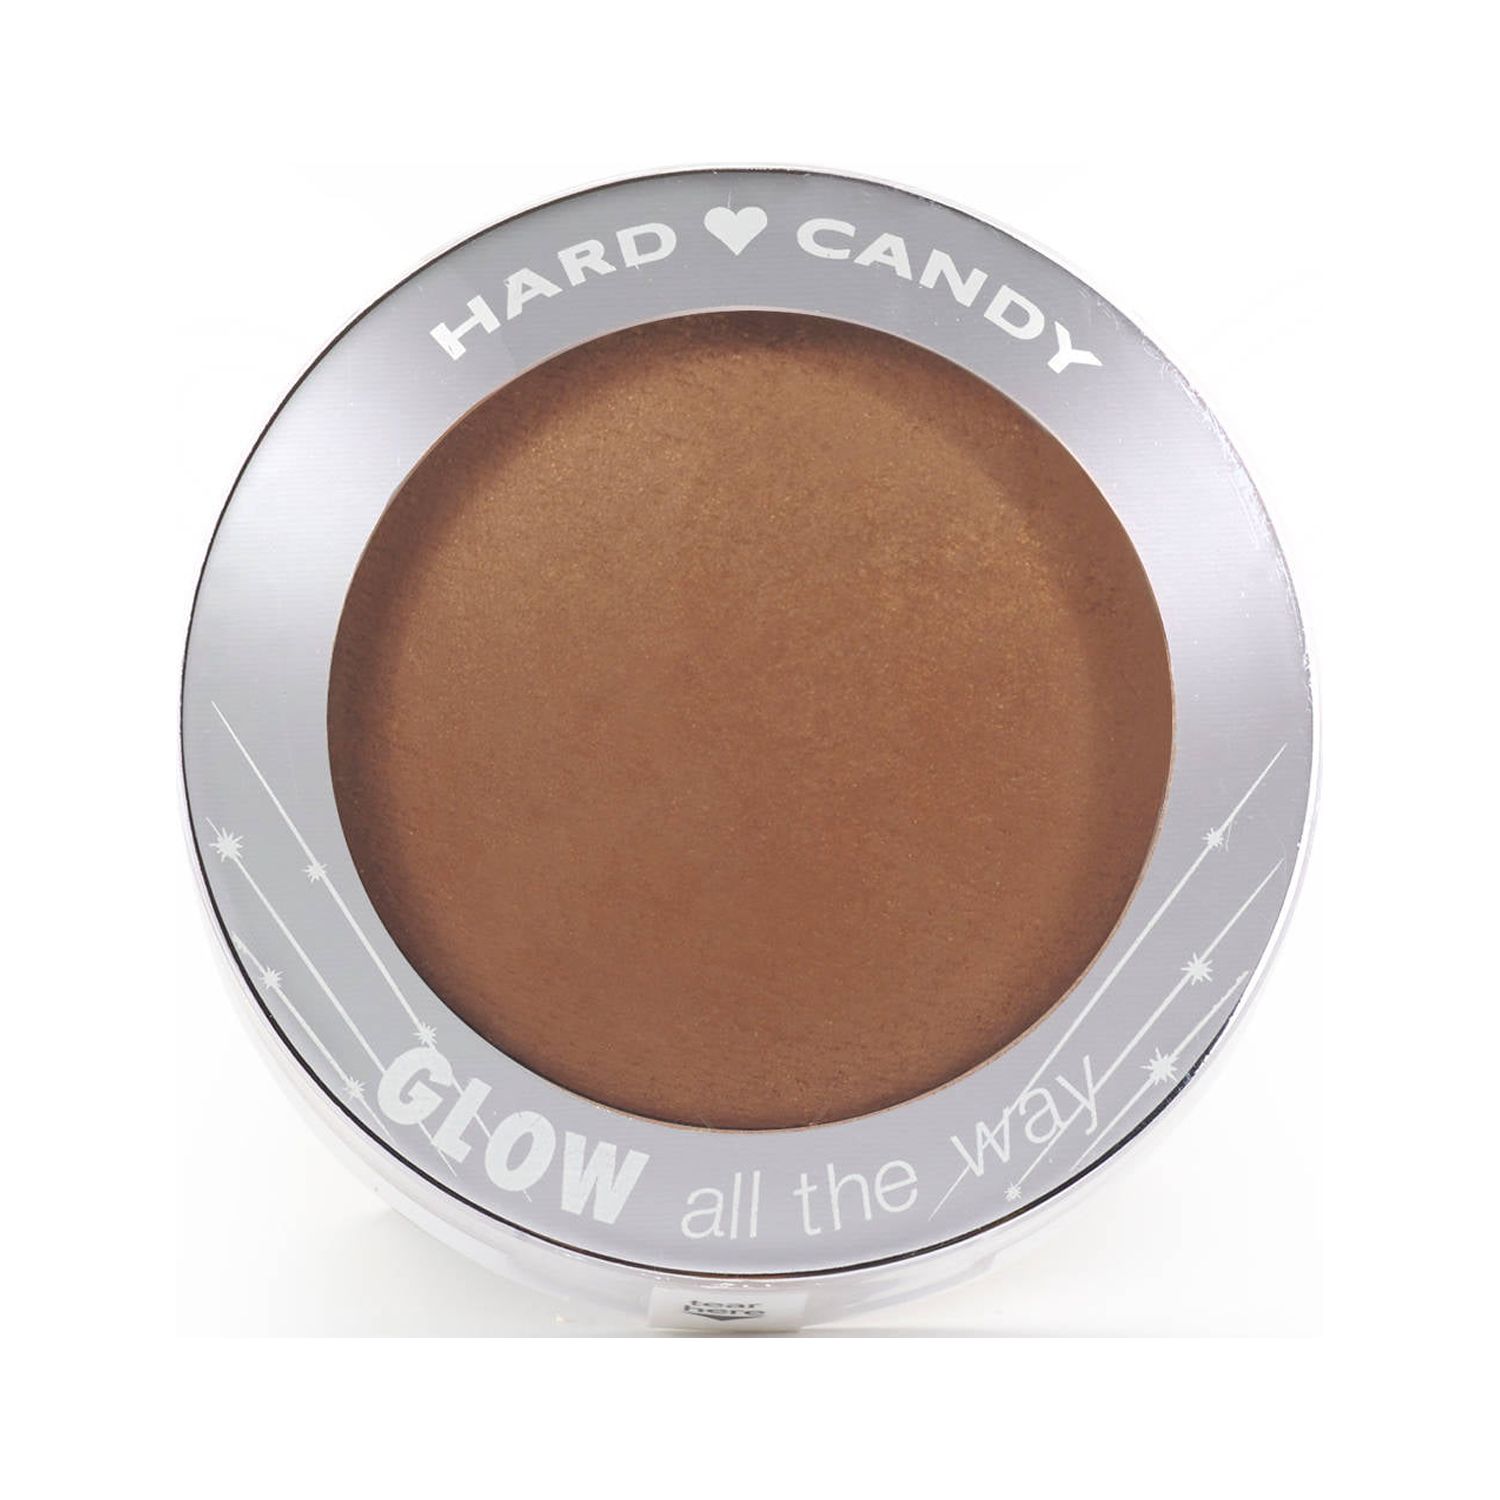 Hard Candy Glow All the Way Baked Bronzer, Heat Wave - image 1 of 4